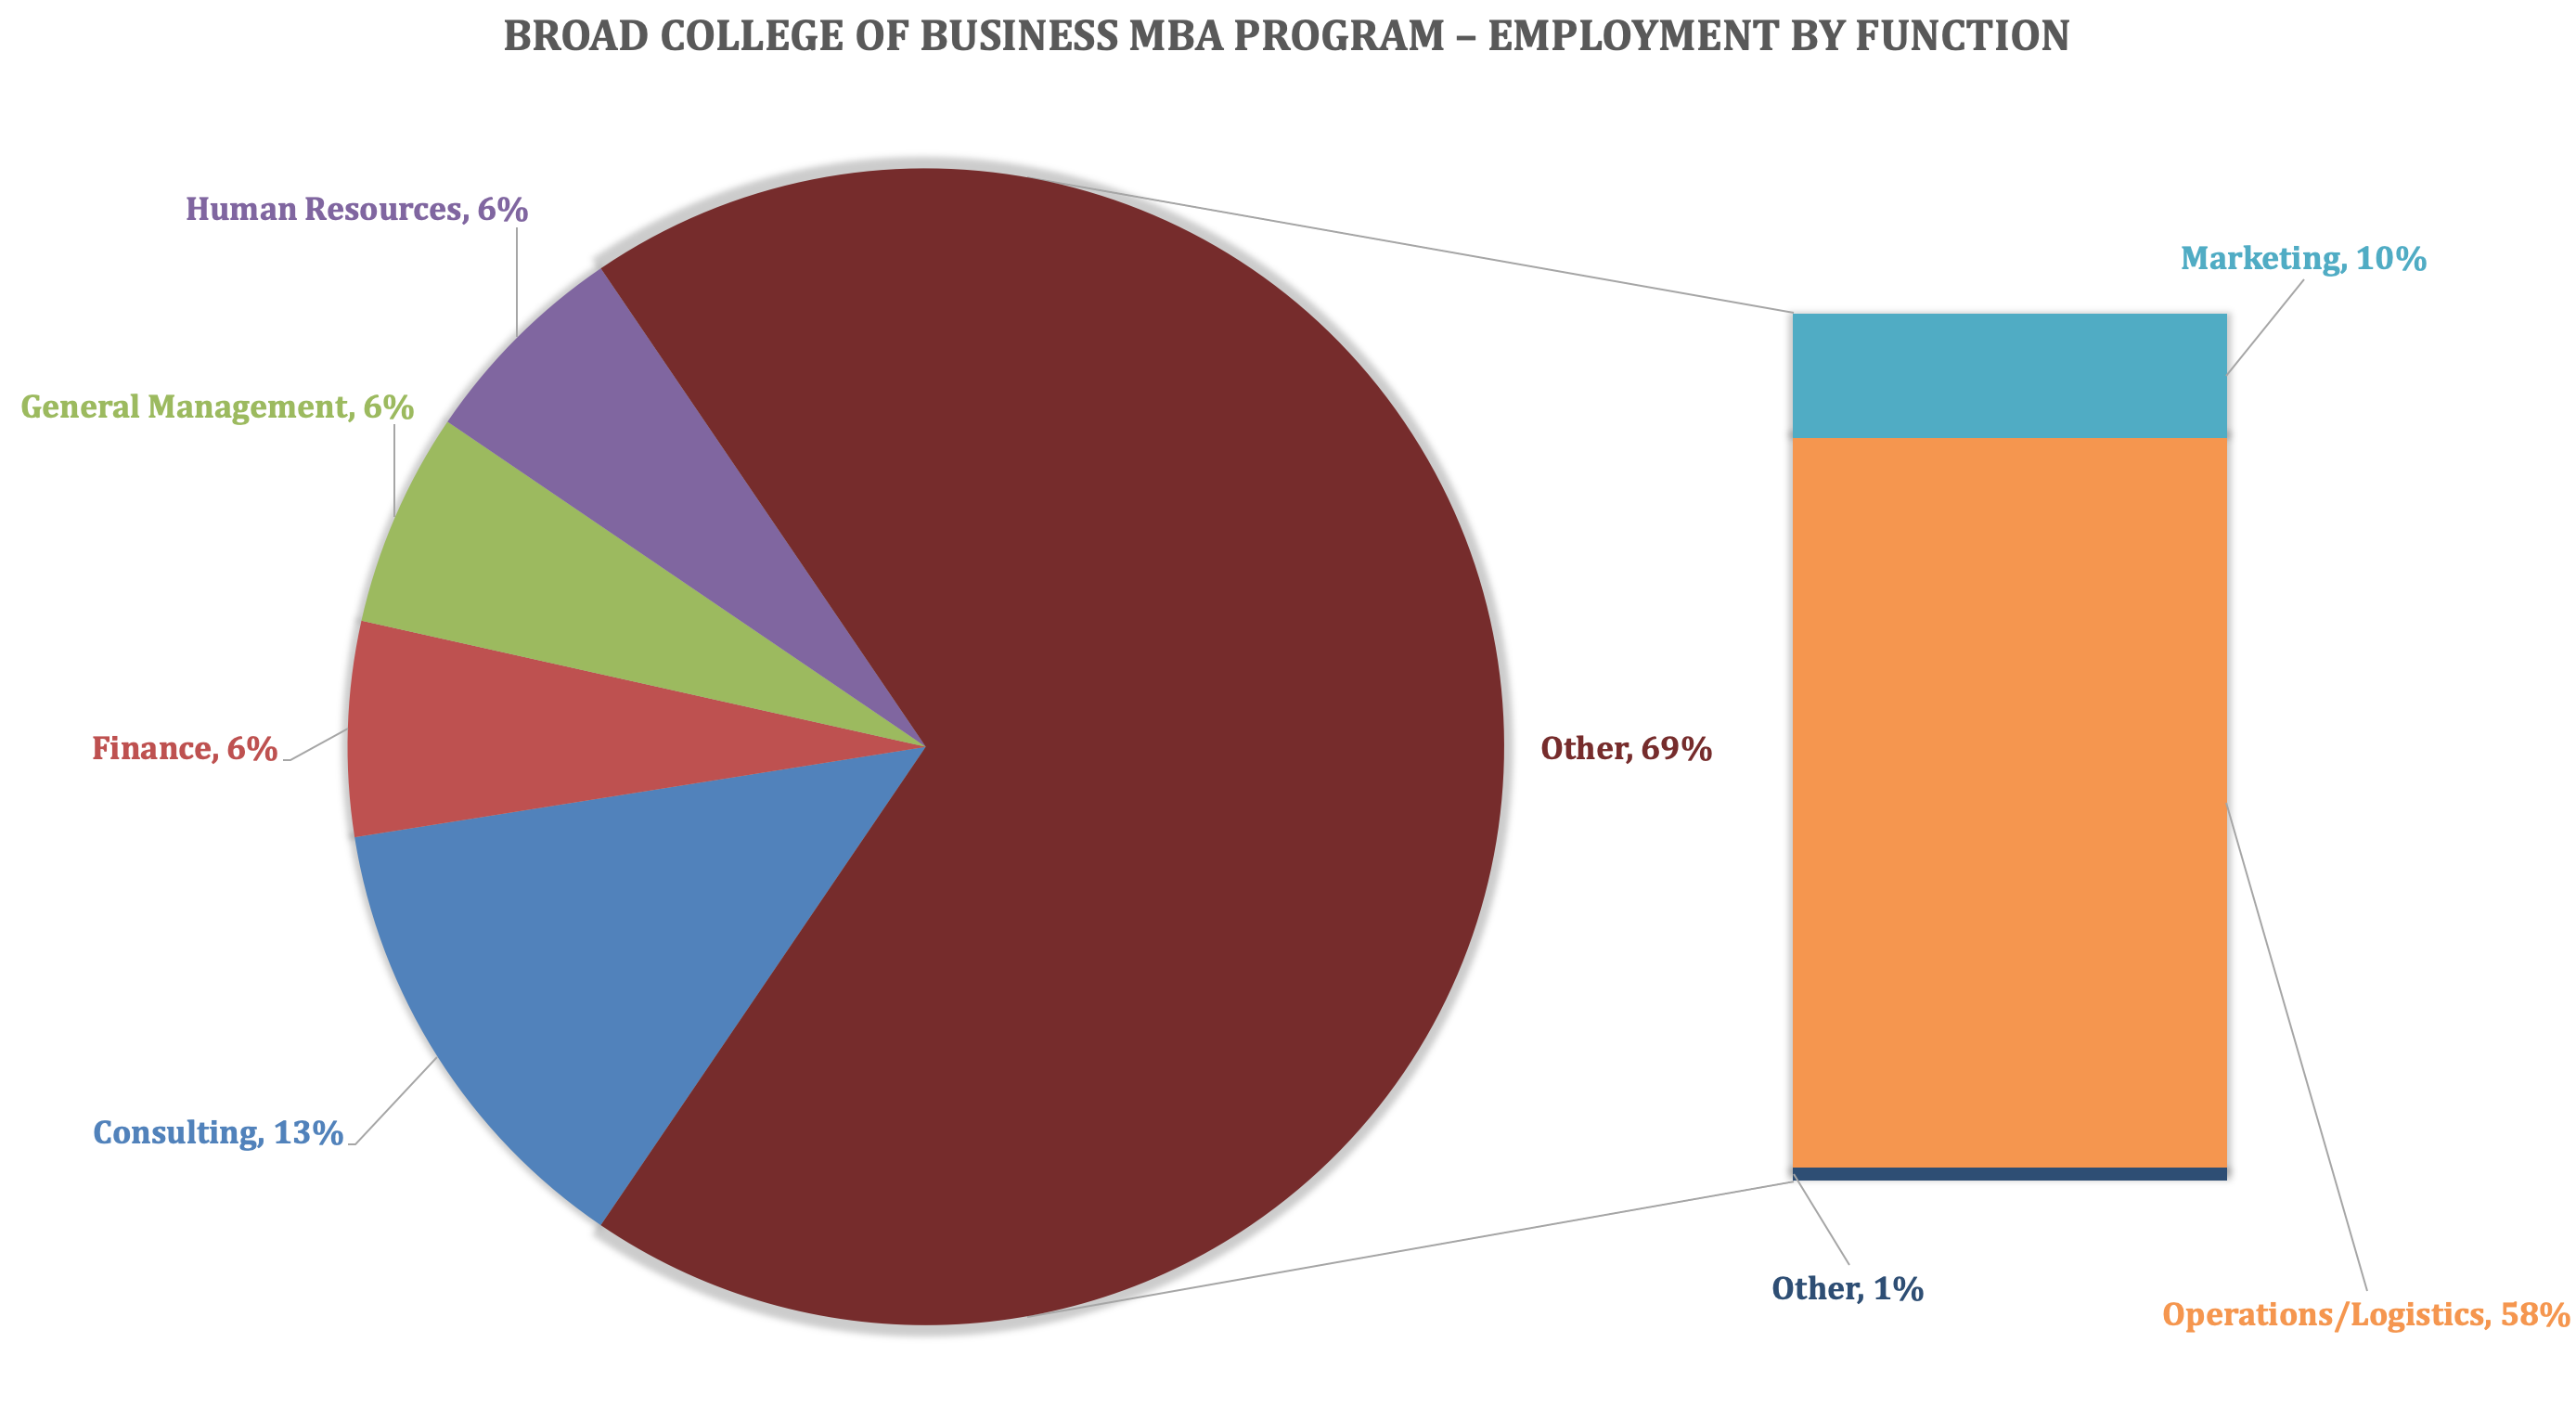 MSU MBA Program - Broad College of Business - Employment by Function